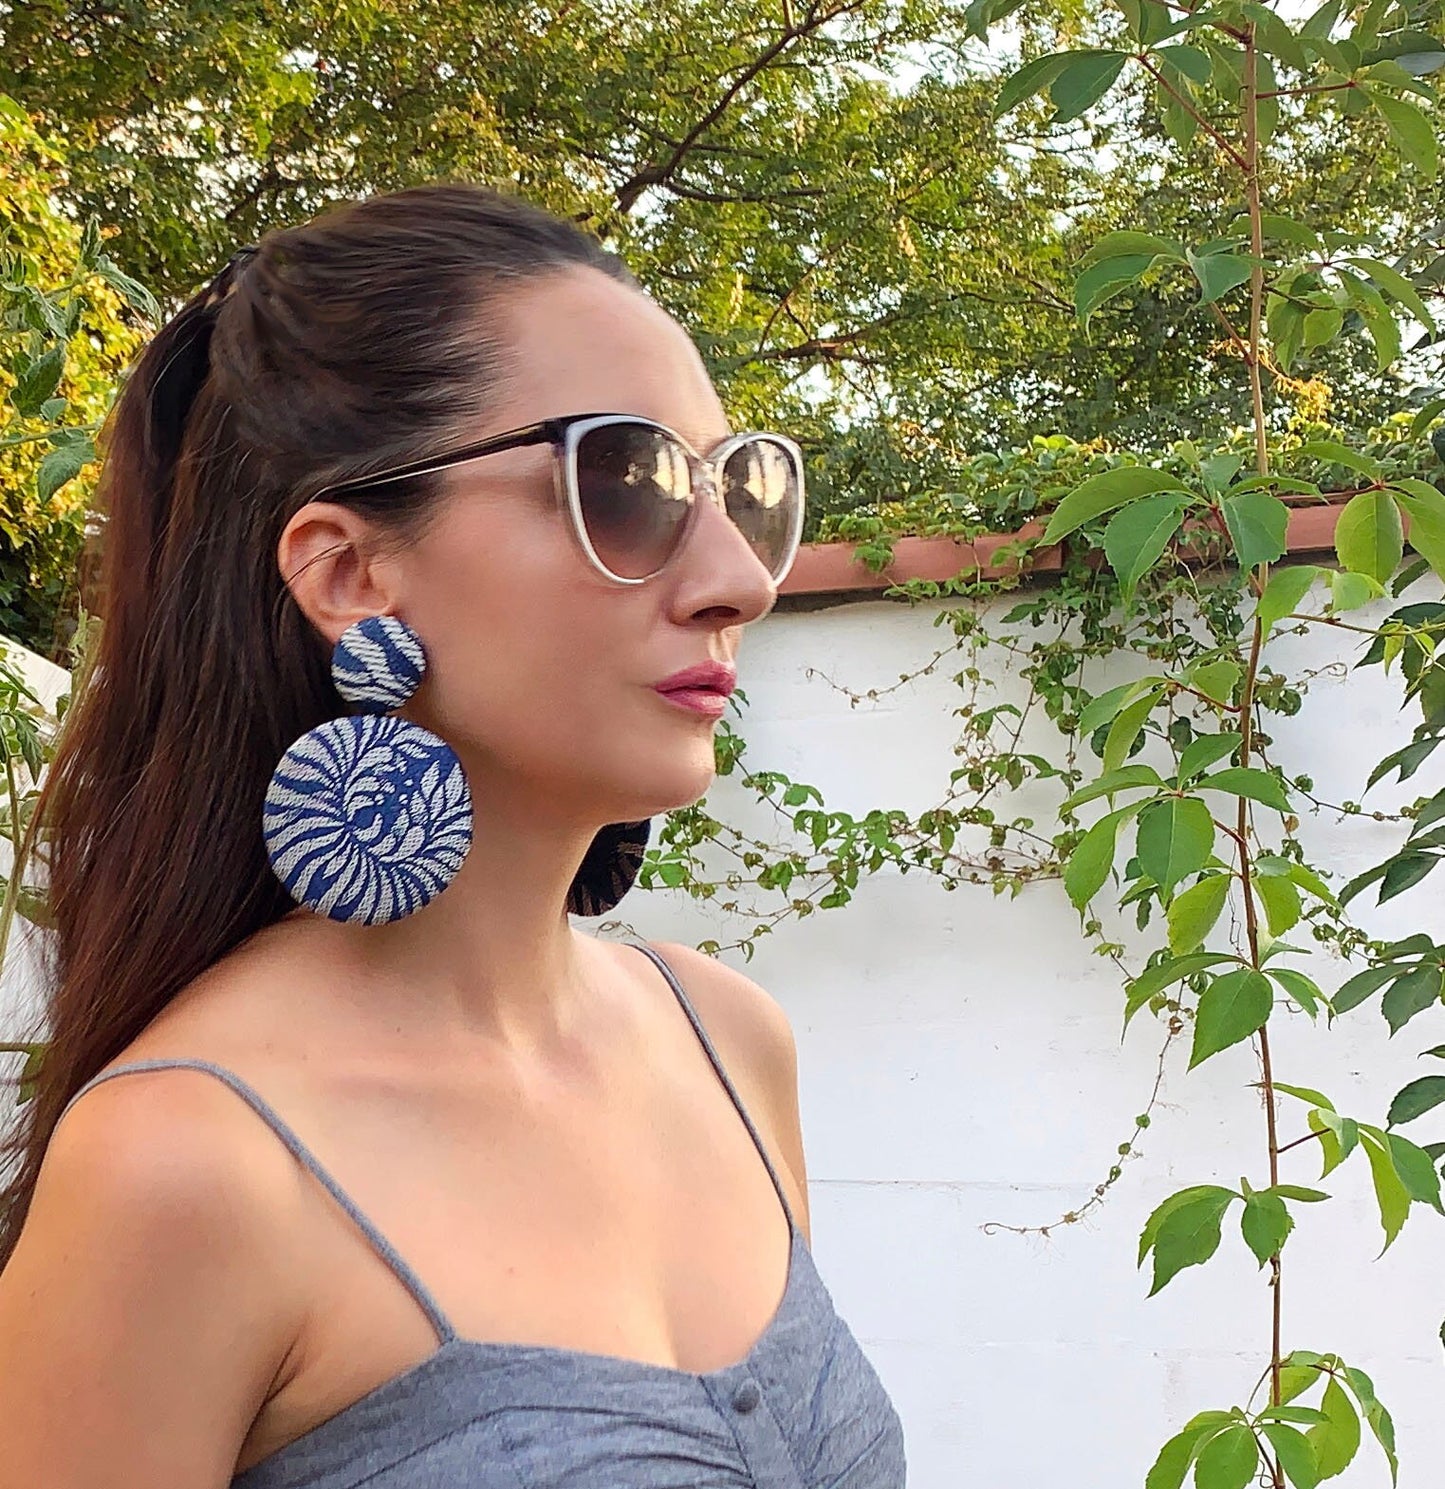 Blue Silver Denim Metallic Fabric Earrings - from Recycled Materials